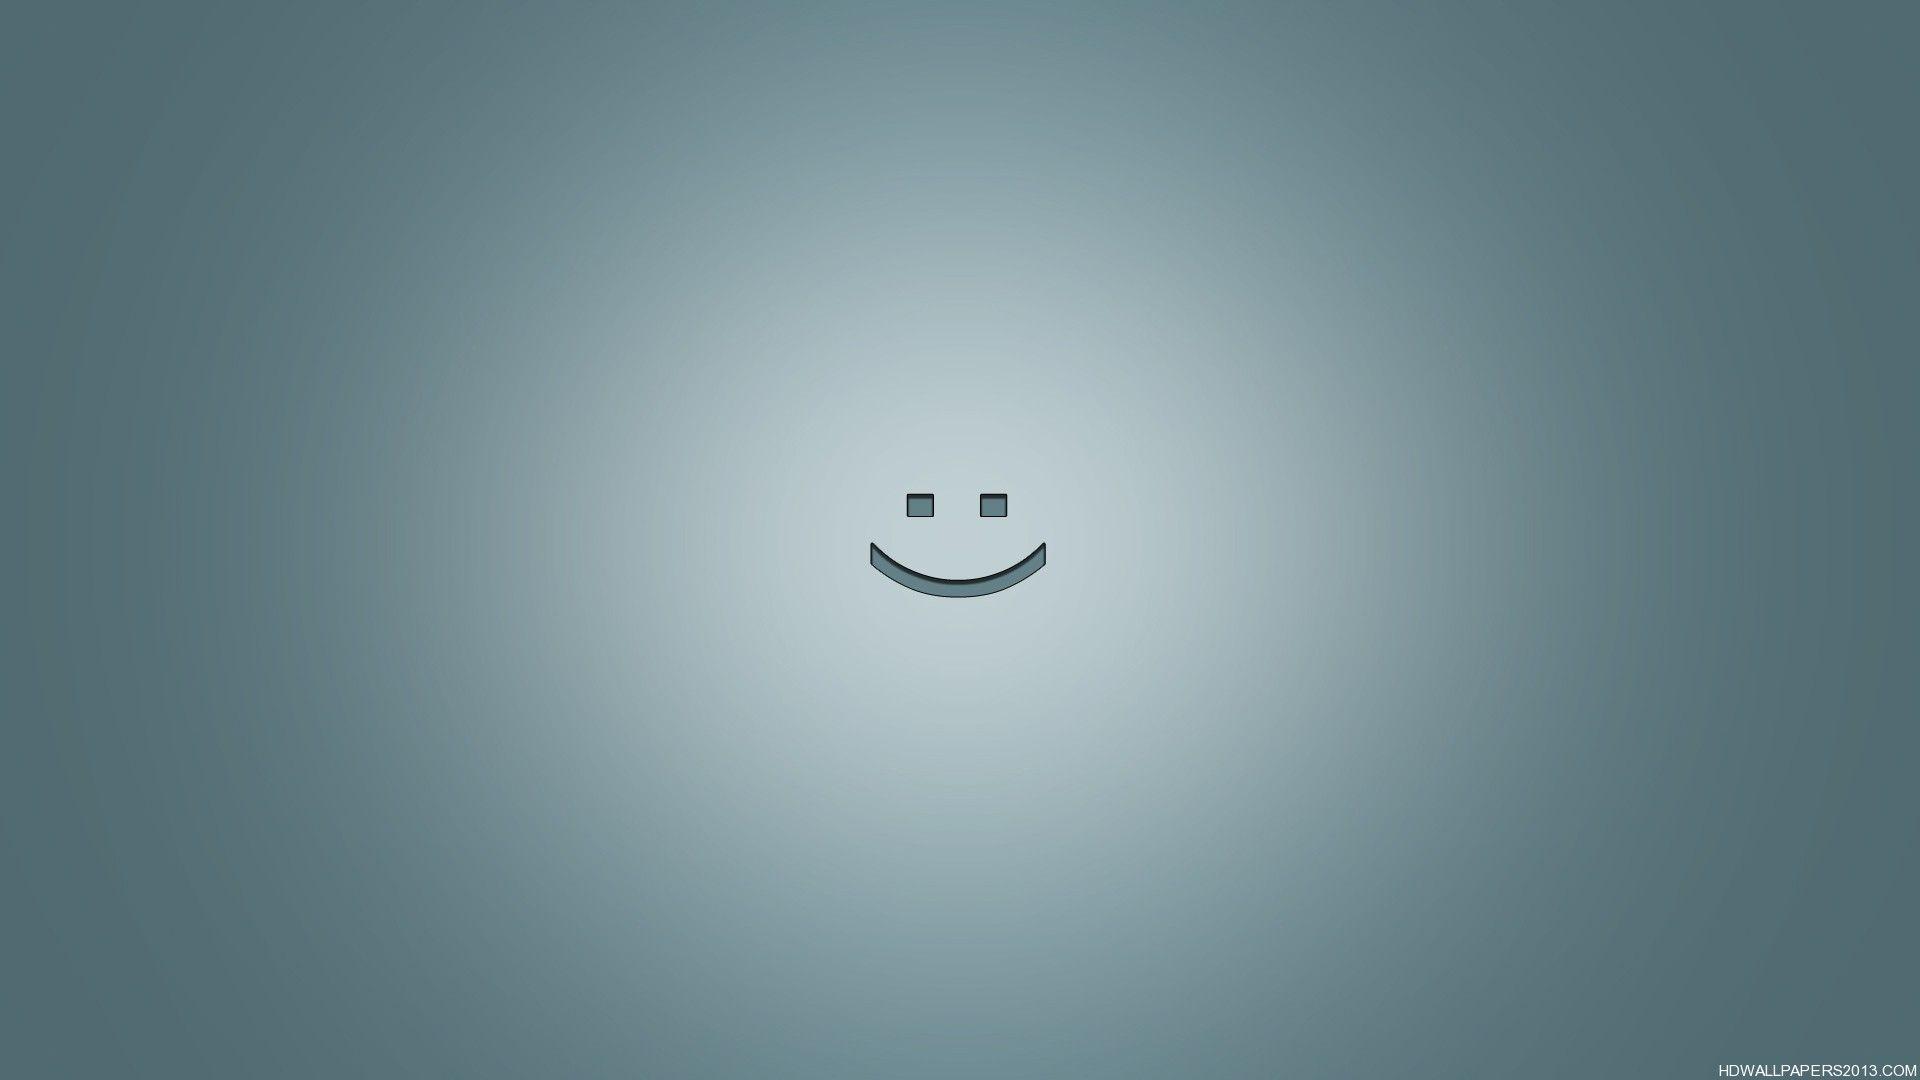 Smile Wallpapers - Wallpaper Cave